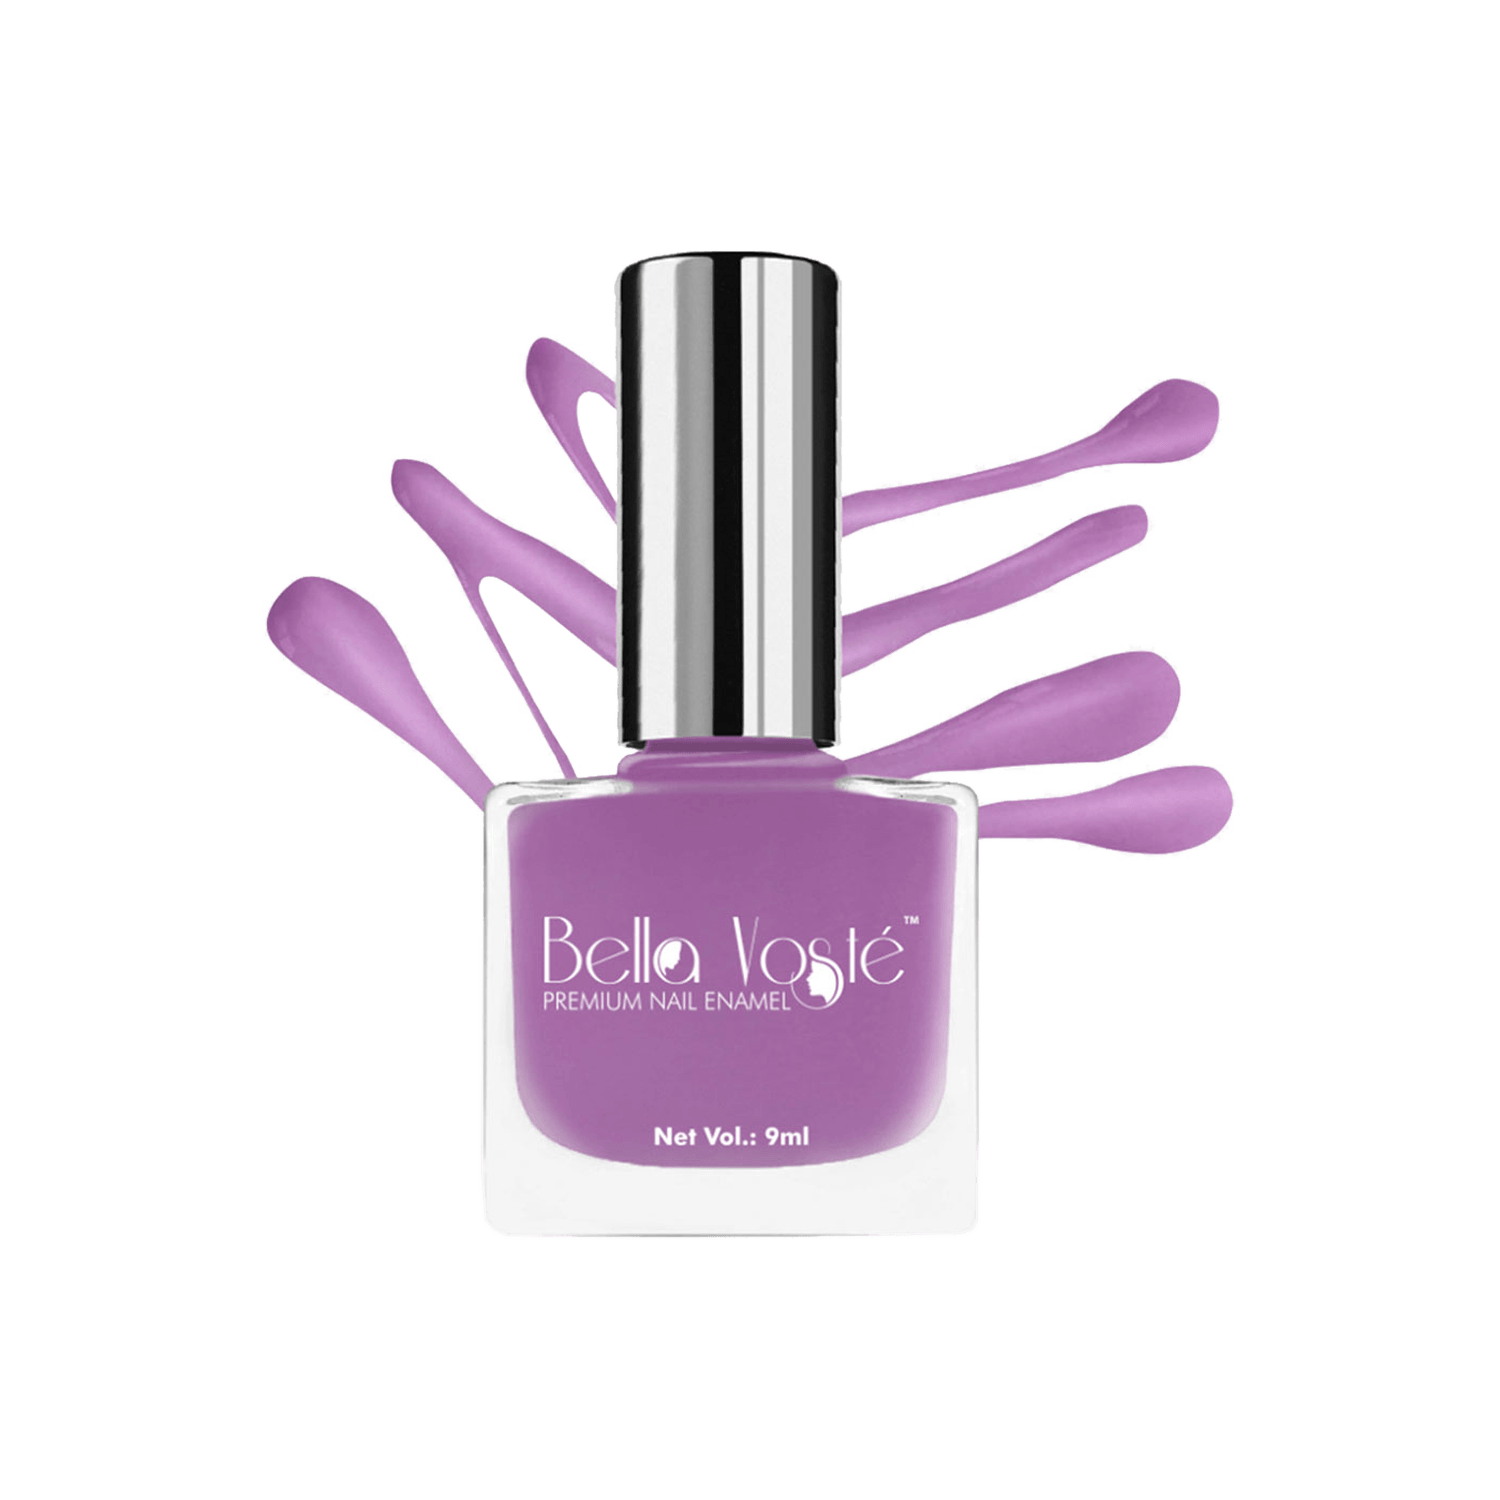 Bella Voste Pastel Nail Polish|Quick Drying Formula|Cruelty Free|Paraben  Free & No Harmful Chemicals|Vegan|Lasts for 7 Days & more|Chip Resistant  |Pastel COLOR Formula with Smooth & Easy Application | Shade no - P02